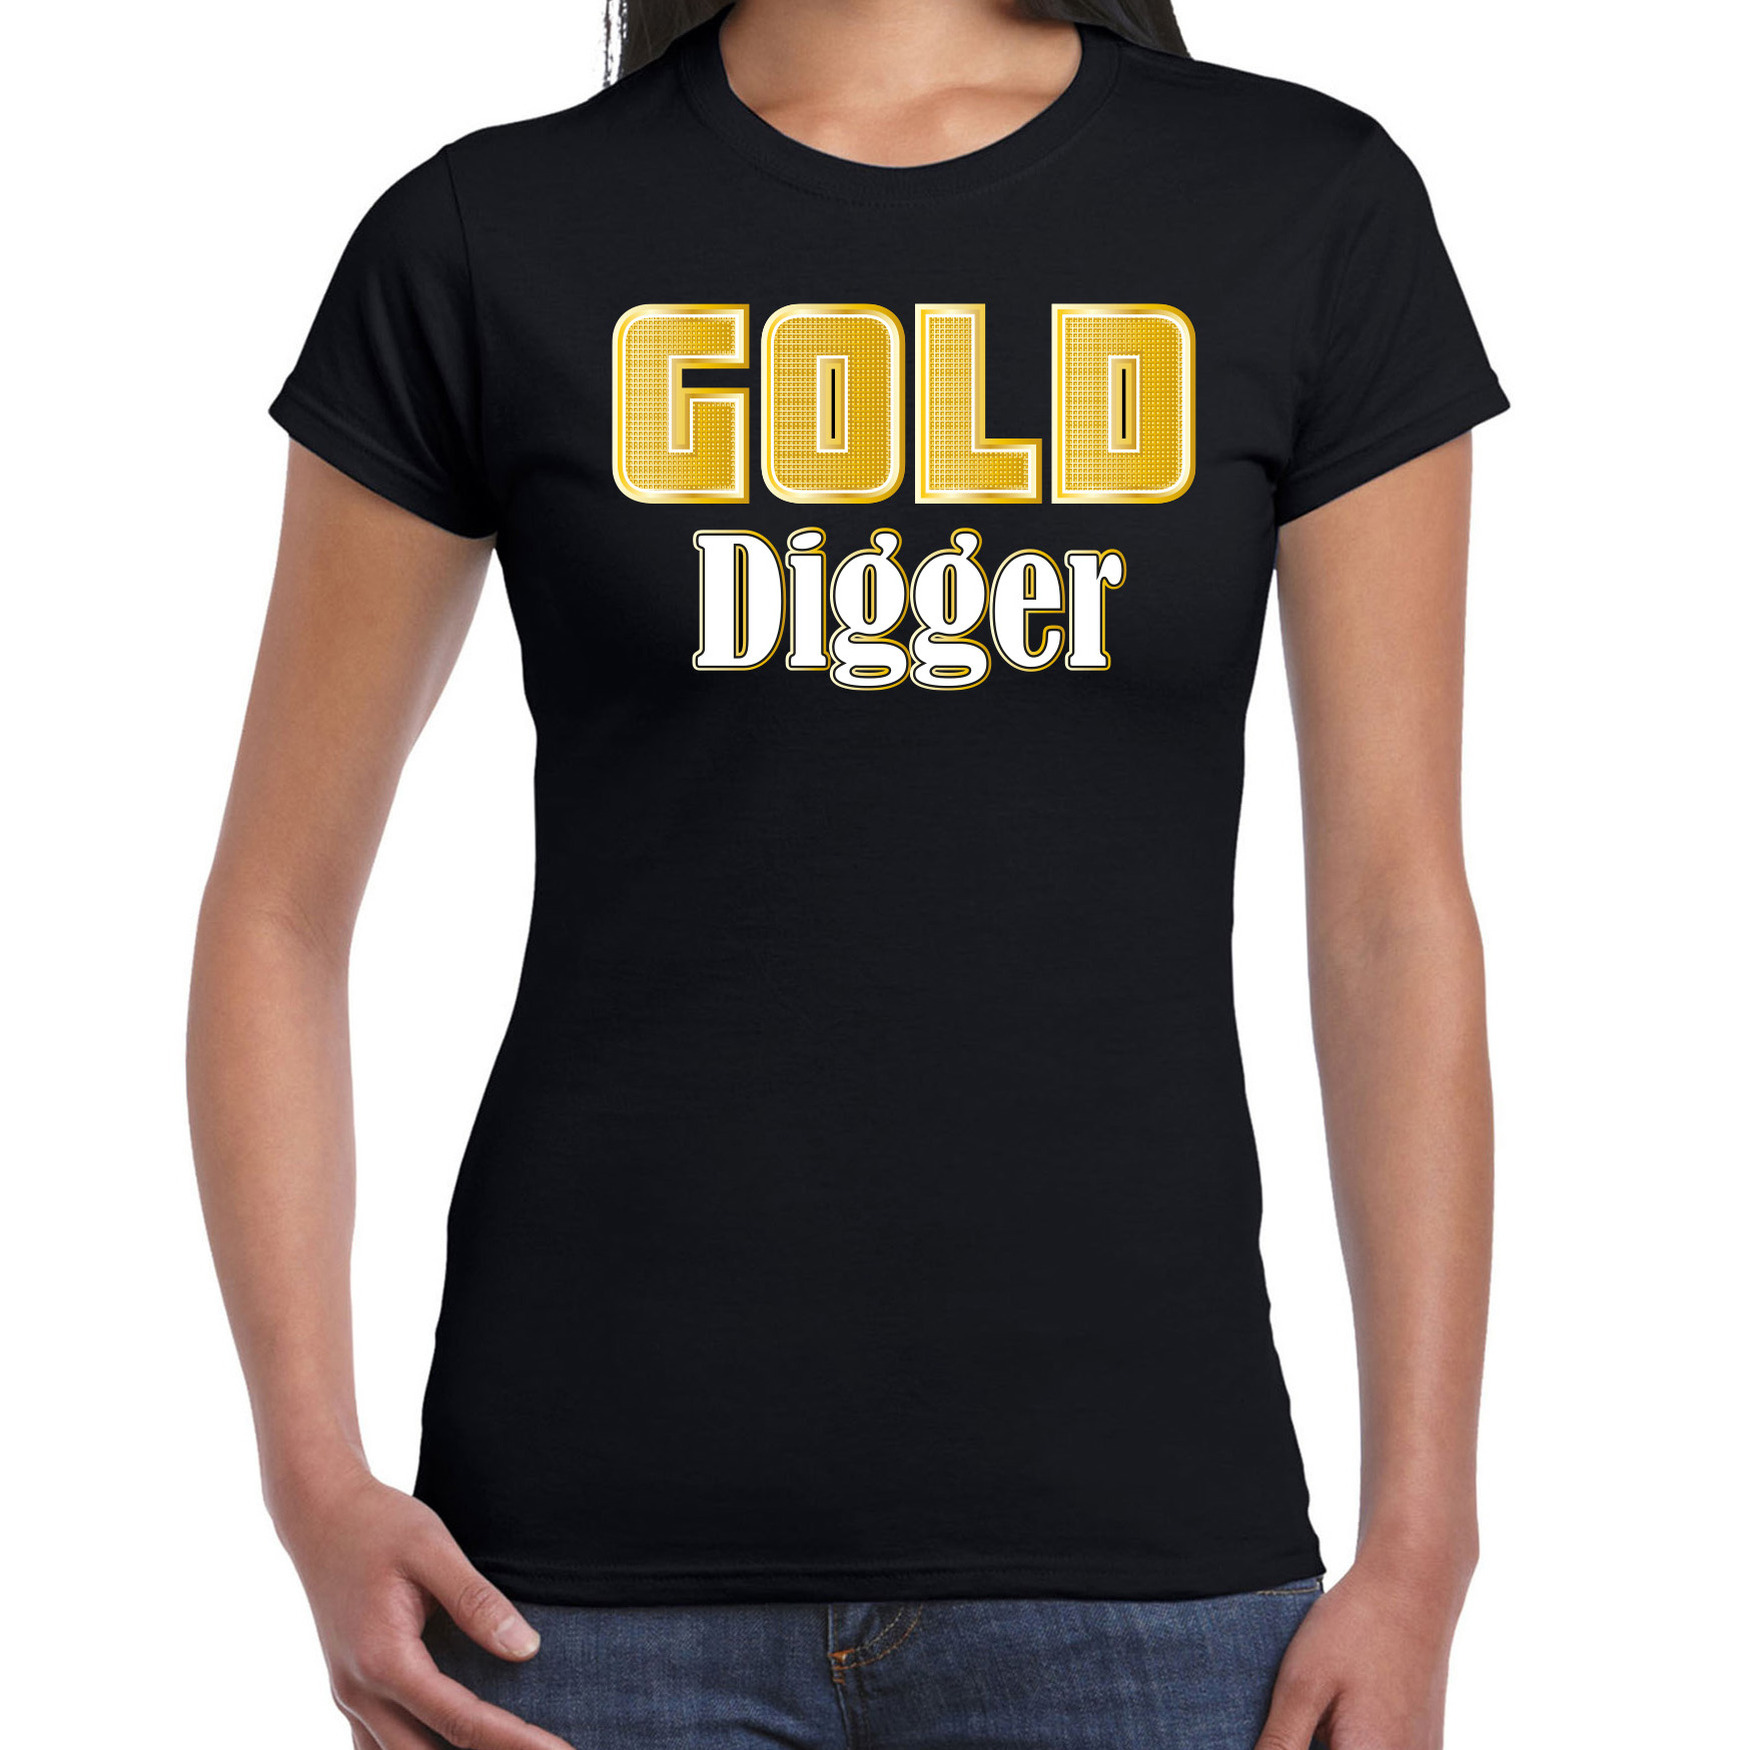 Foute party t-shirt dames foute party outfit-kleding gold digger